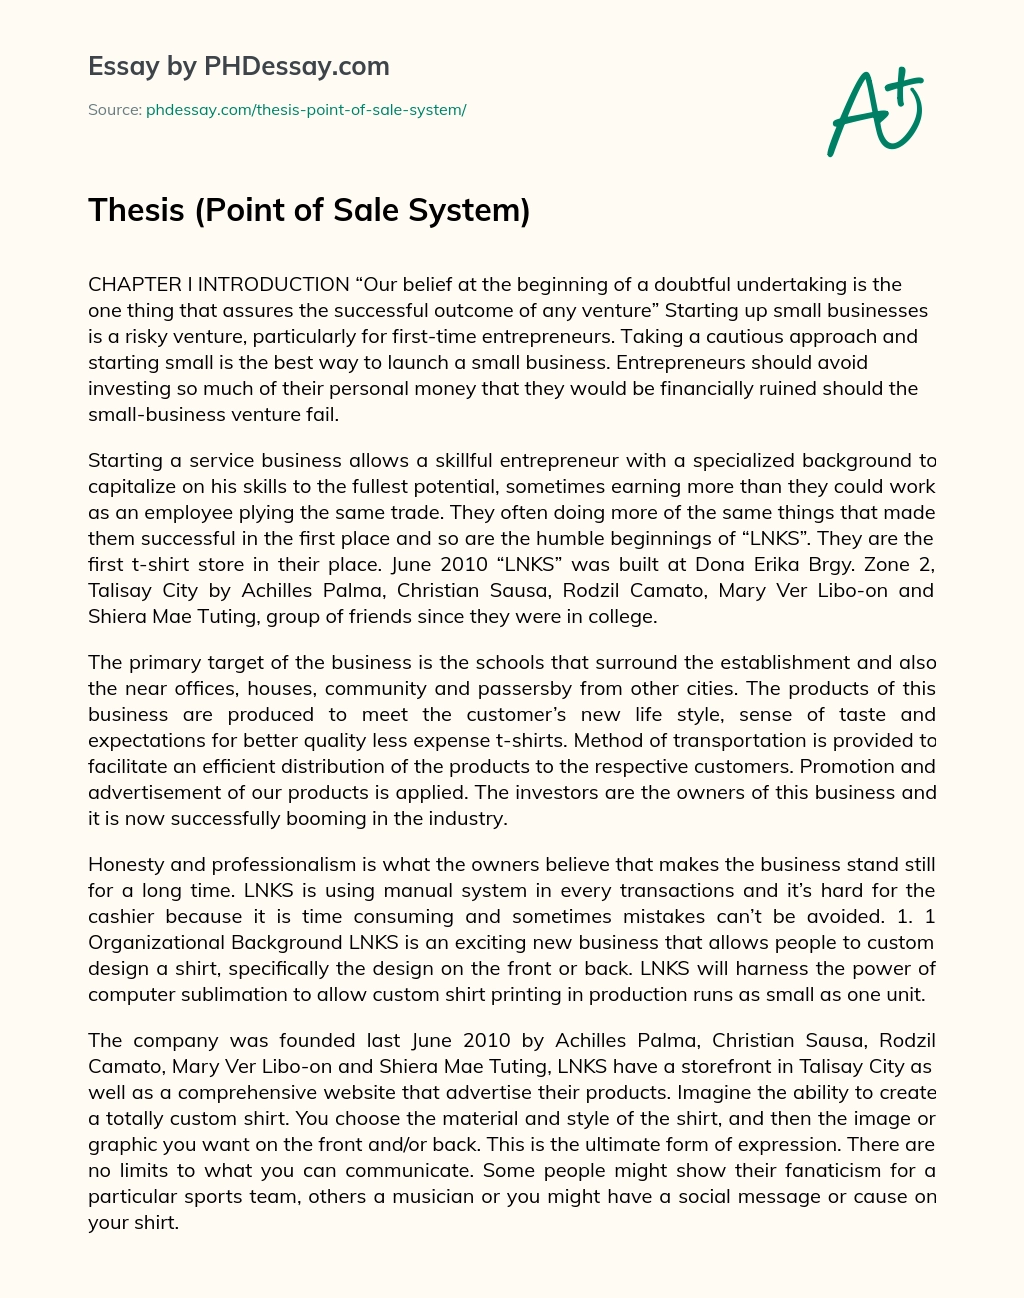 Thesis (Point of Sale System) essay